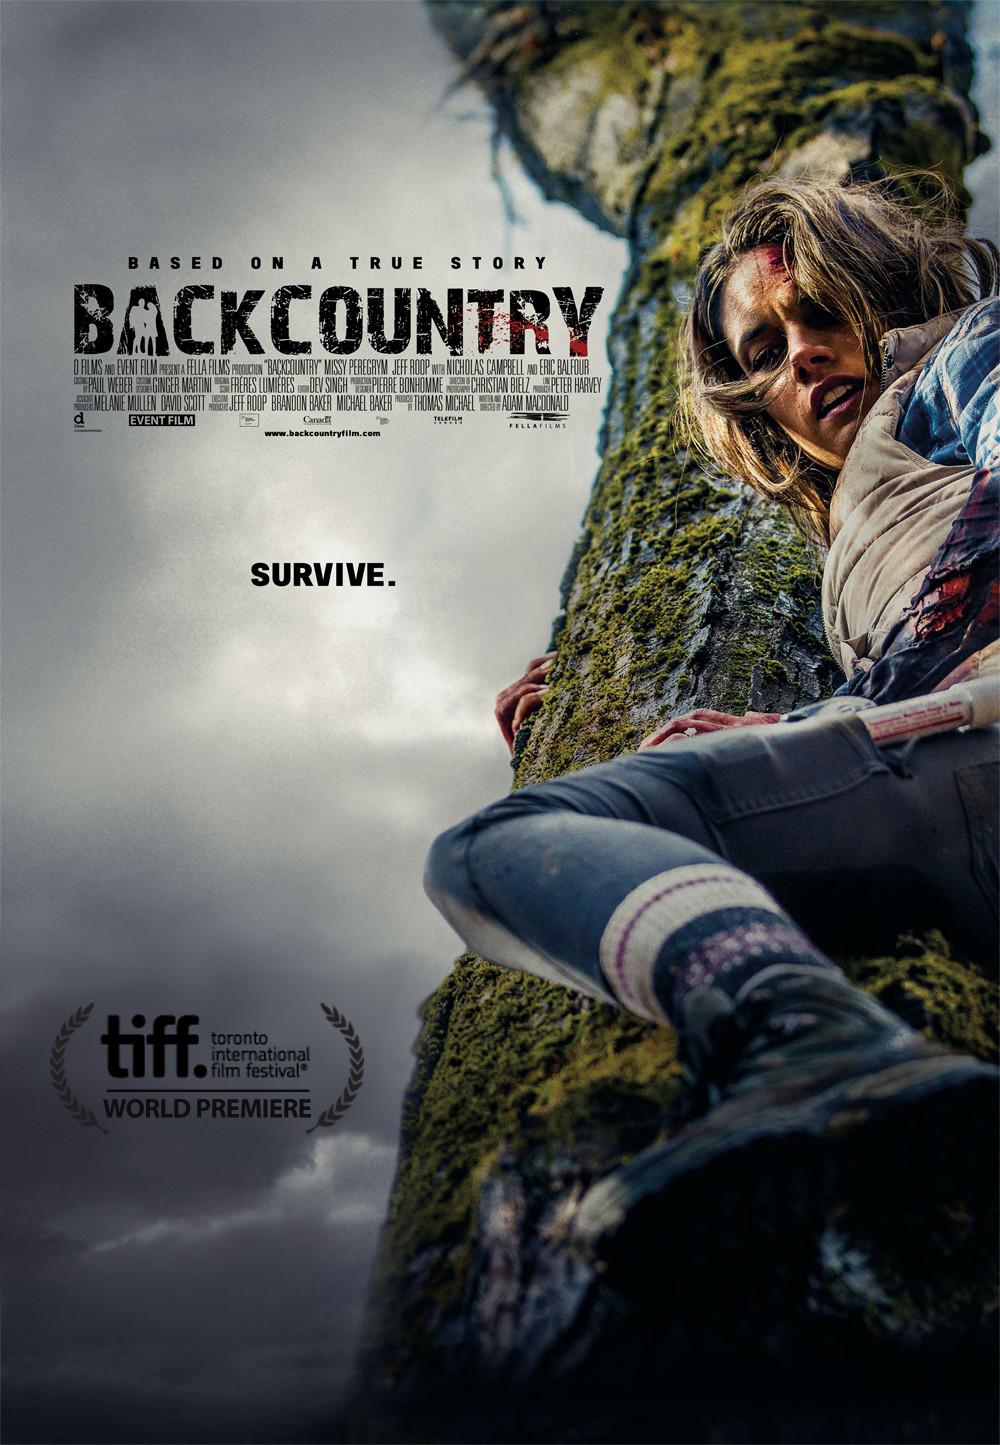 Backcountry Movie Review